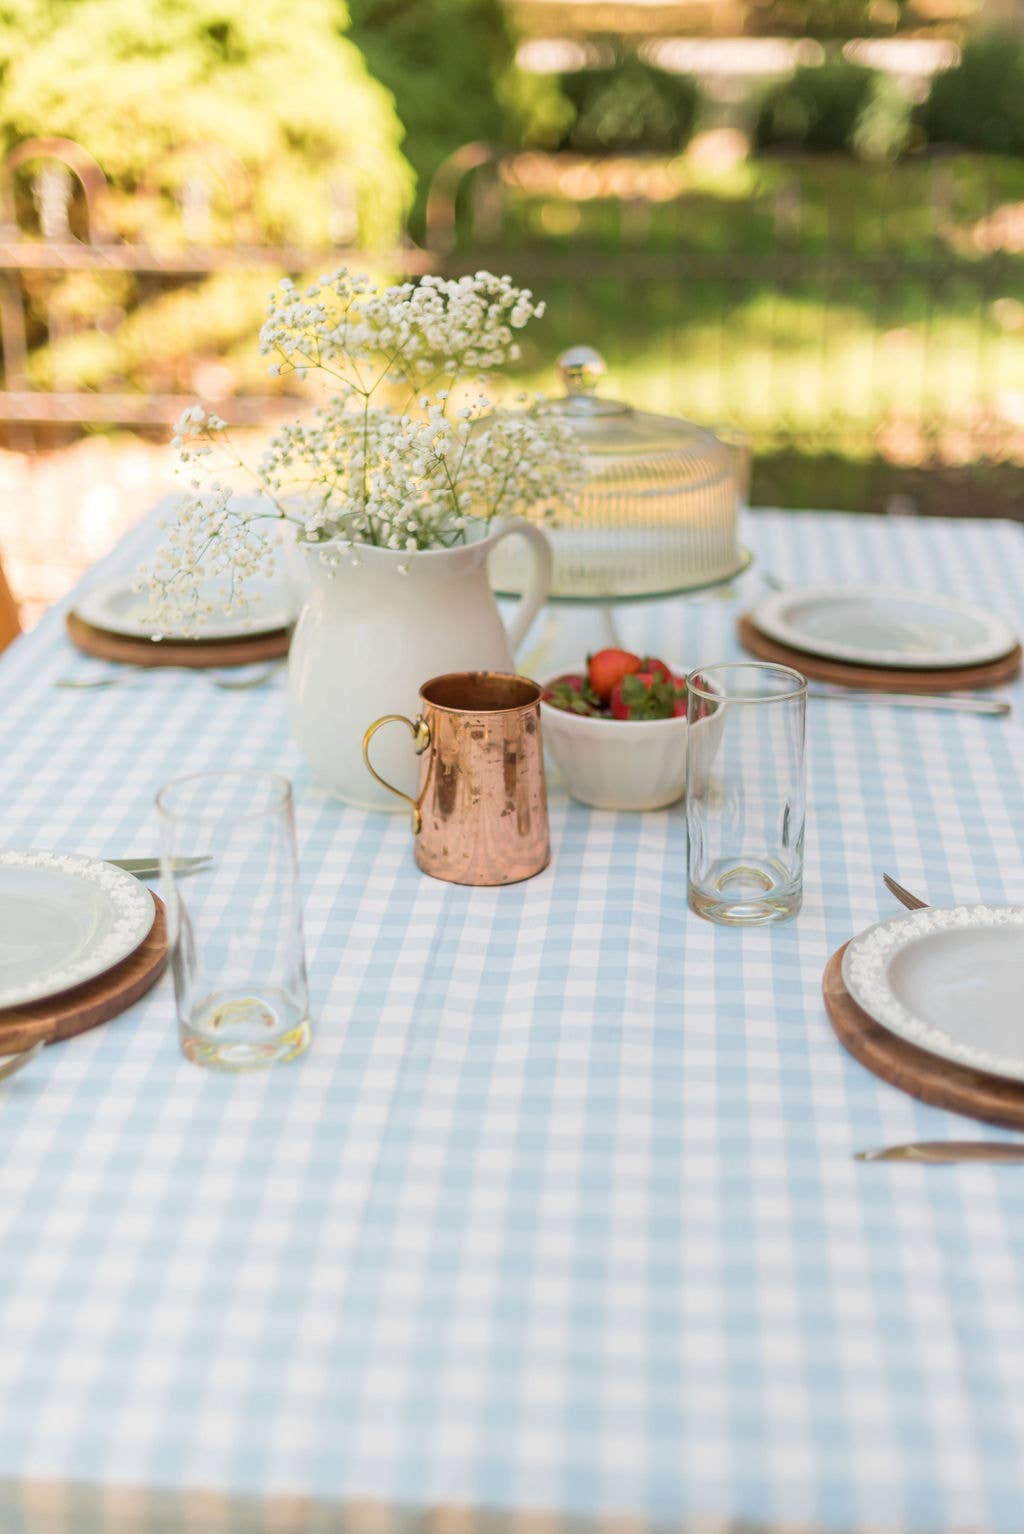 Galley and Fen - Blue Ruffled Gingham Tablecloth: 60" x 120"